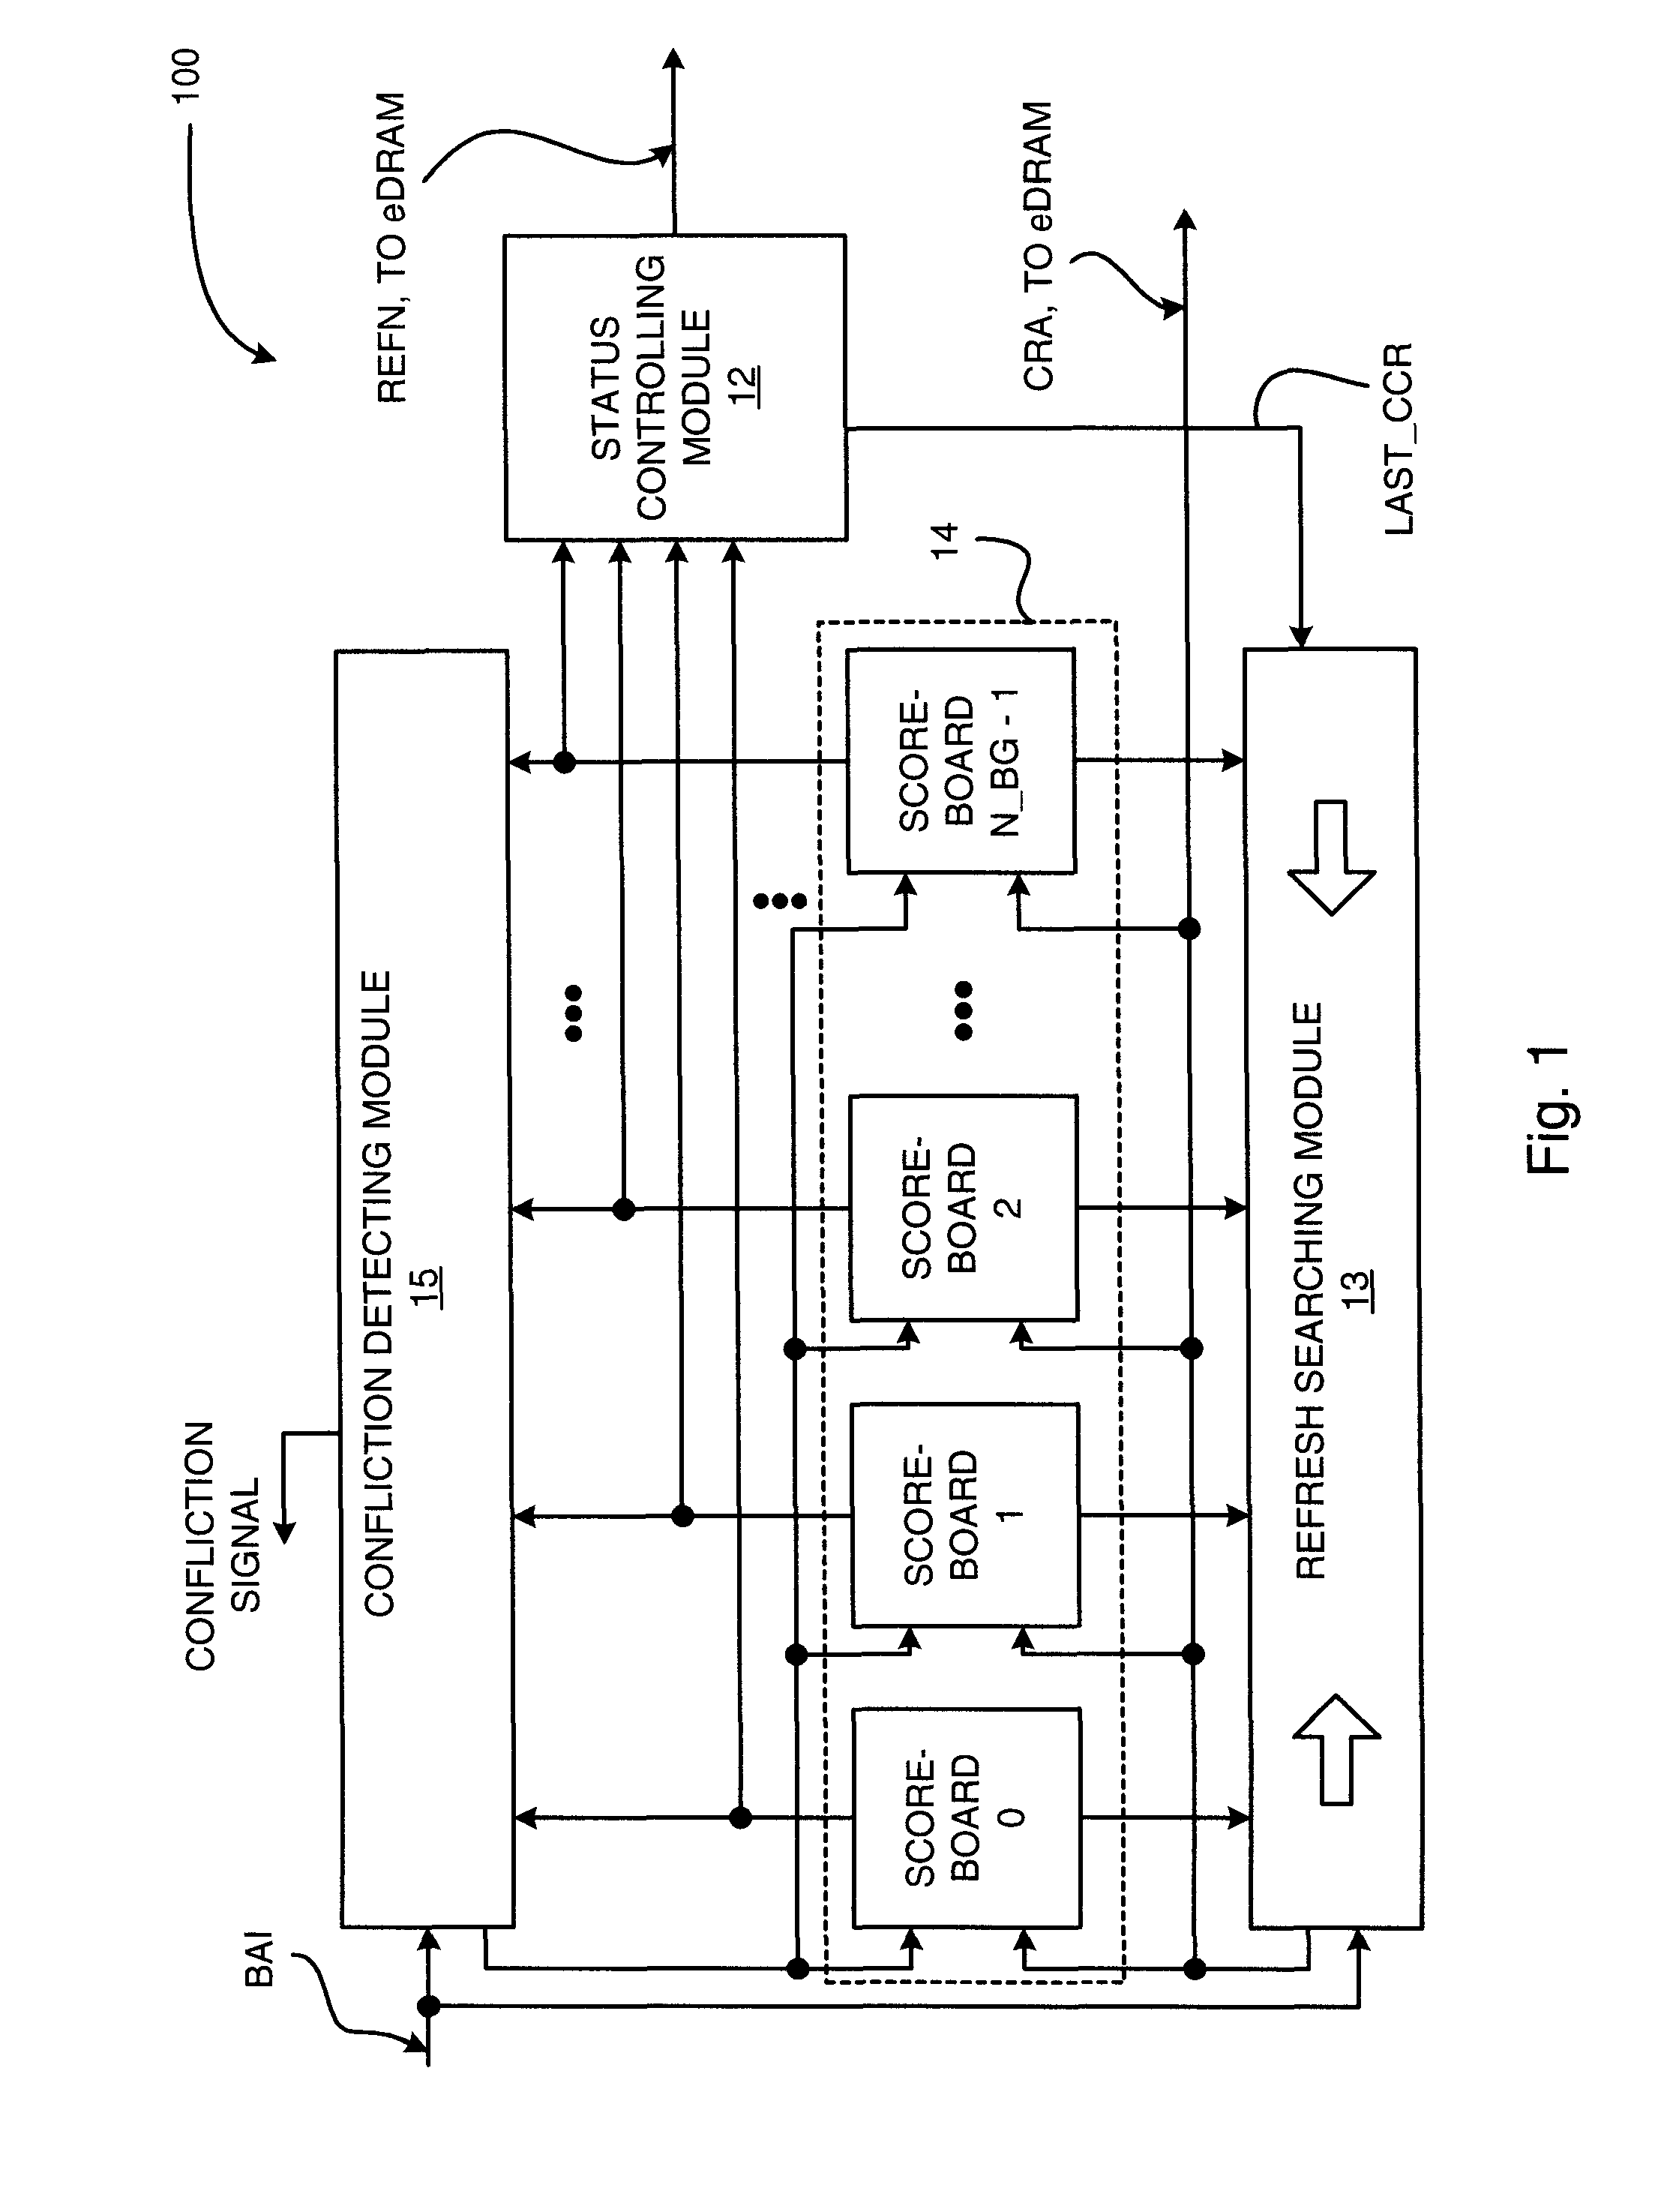 Refresh controller and refresh controlling method for embedded DRAM